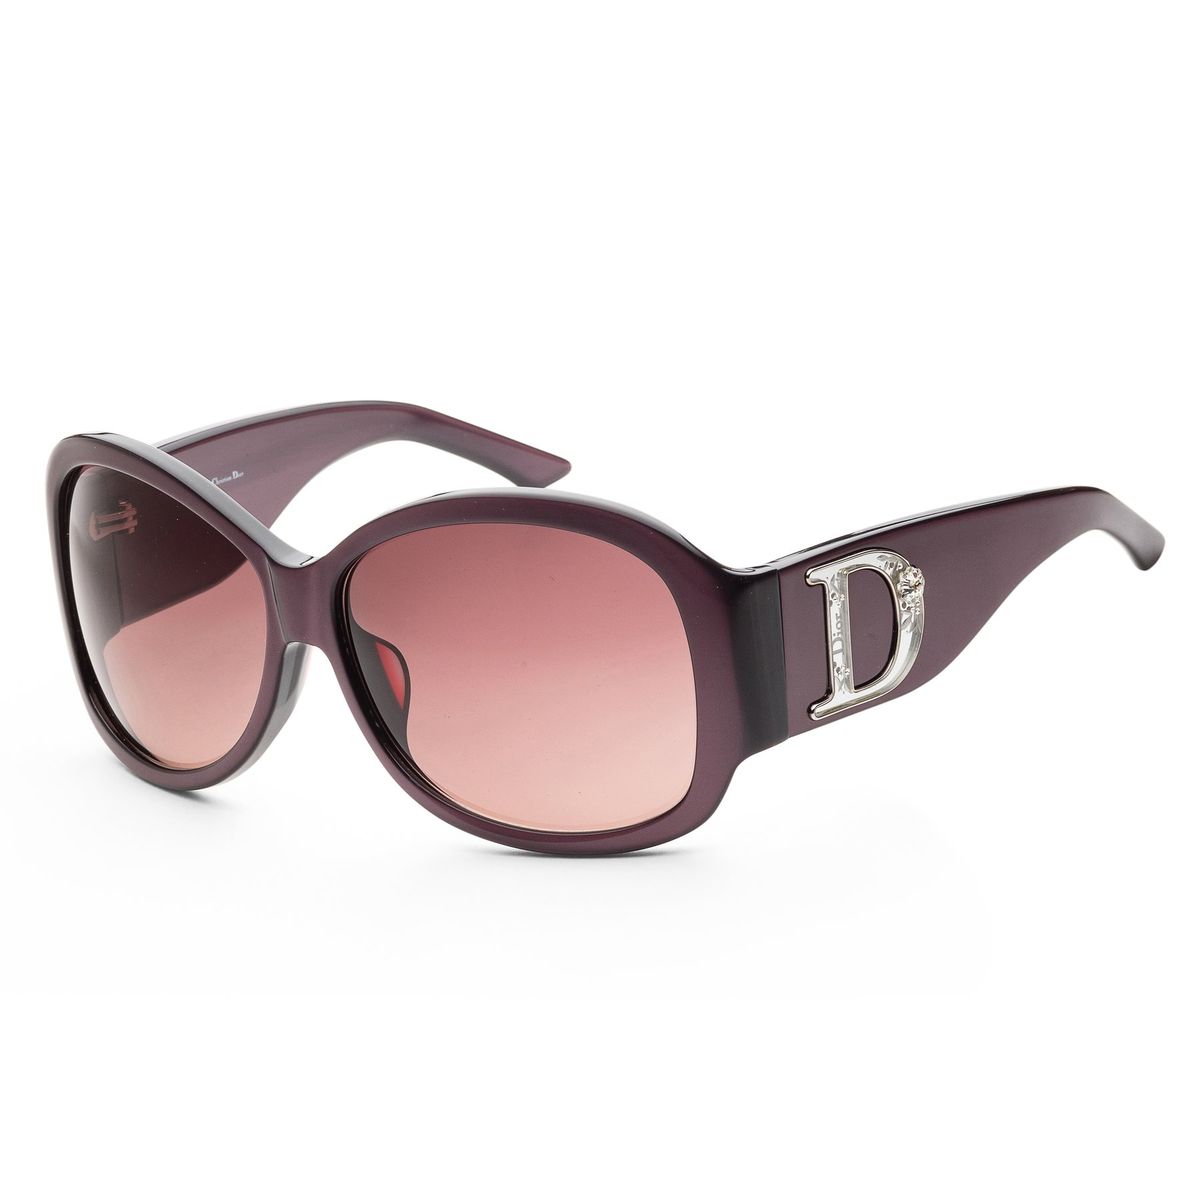 Christian Dior Boudoir Sunglasses | Buy Online in South Africa ...